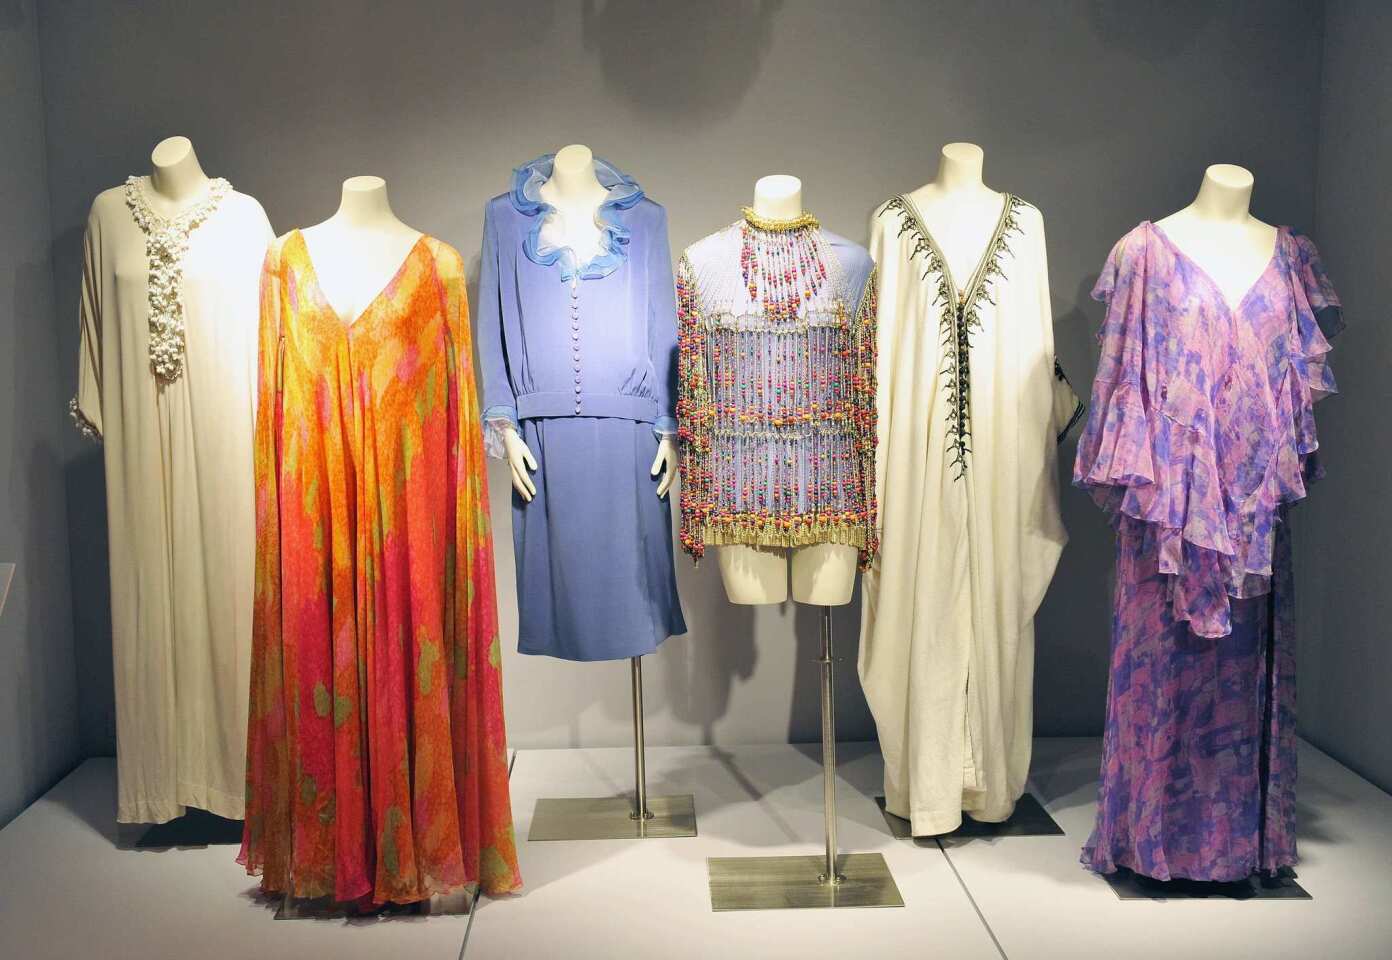 The collection of Elizabeth Taylor